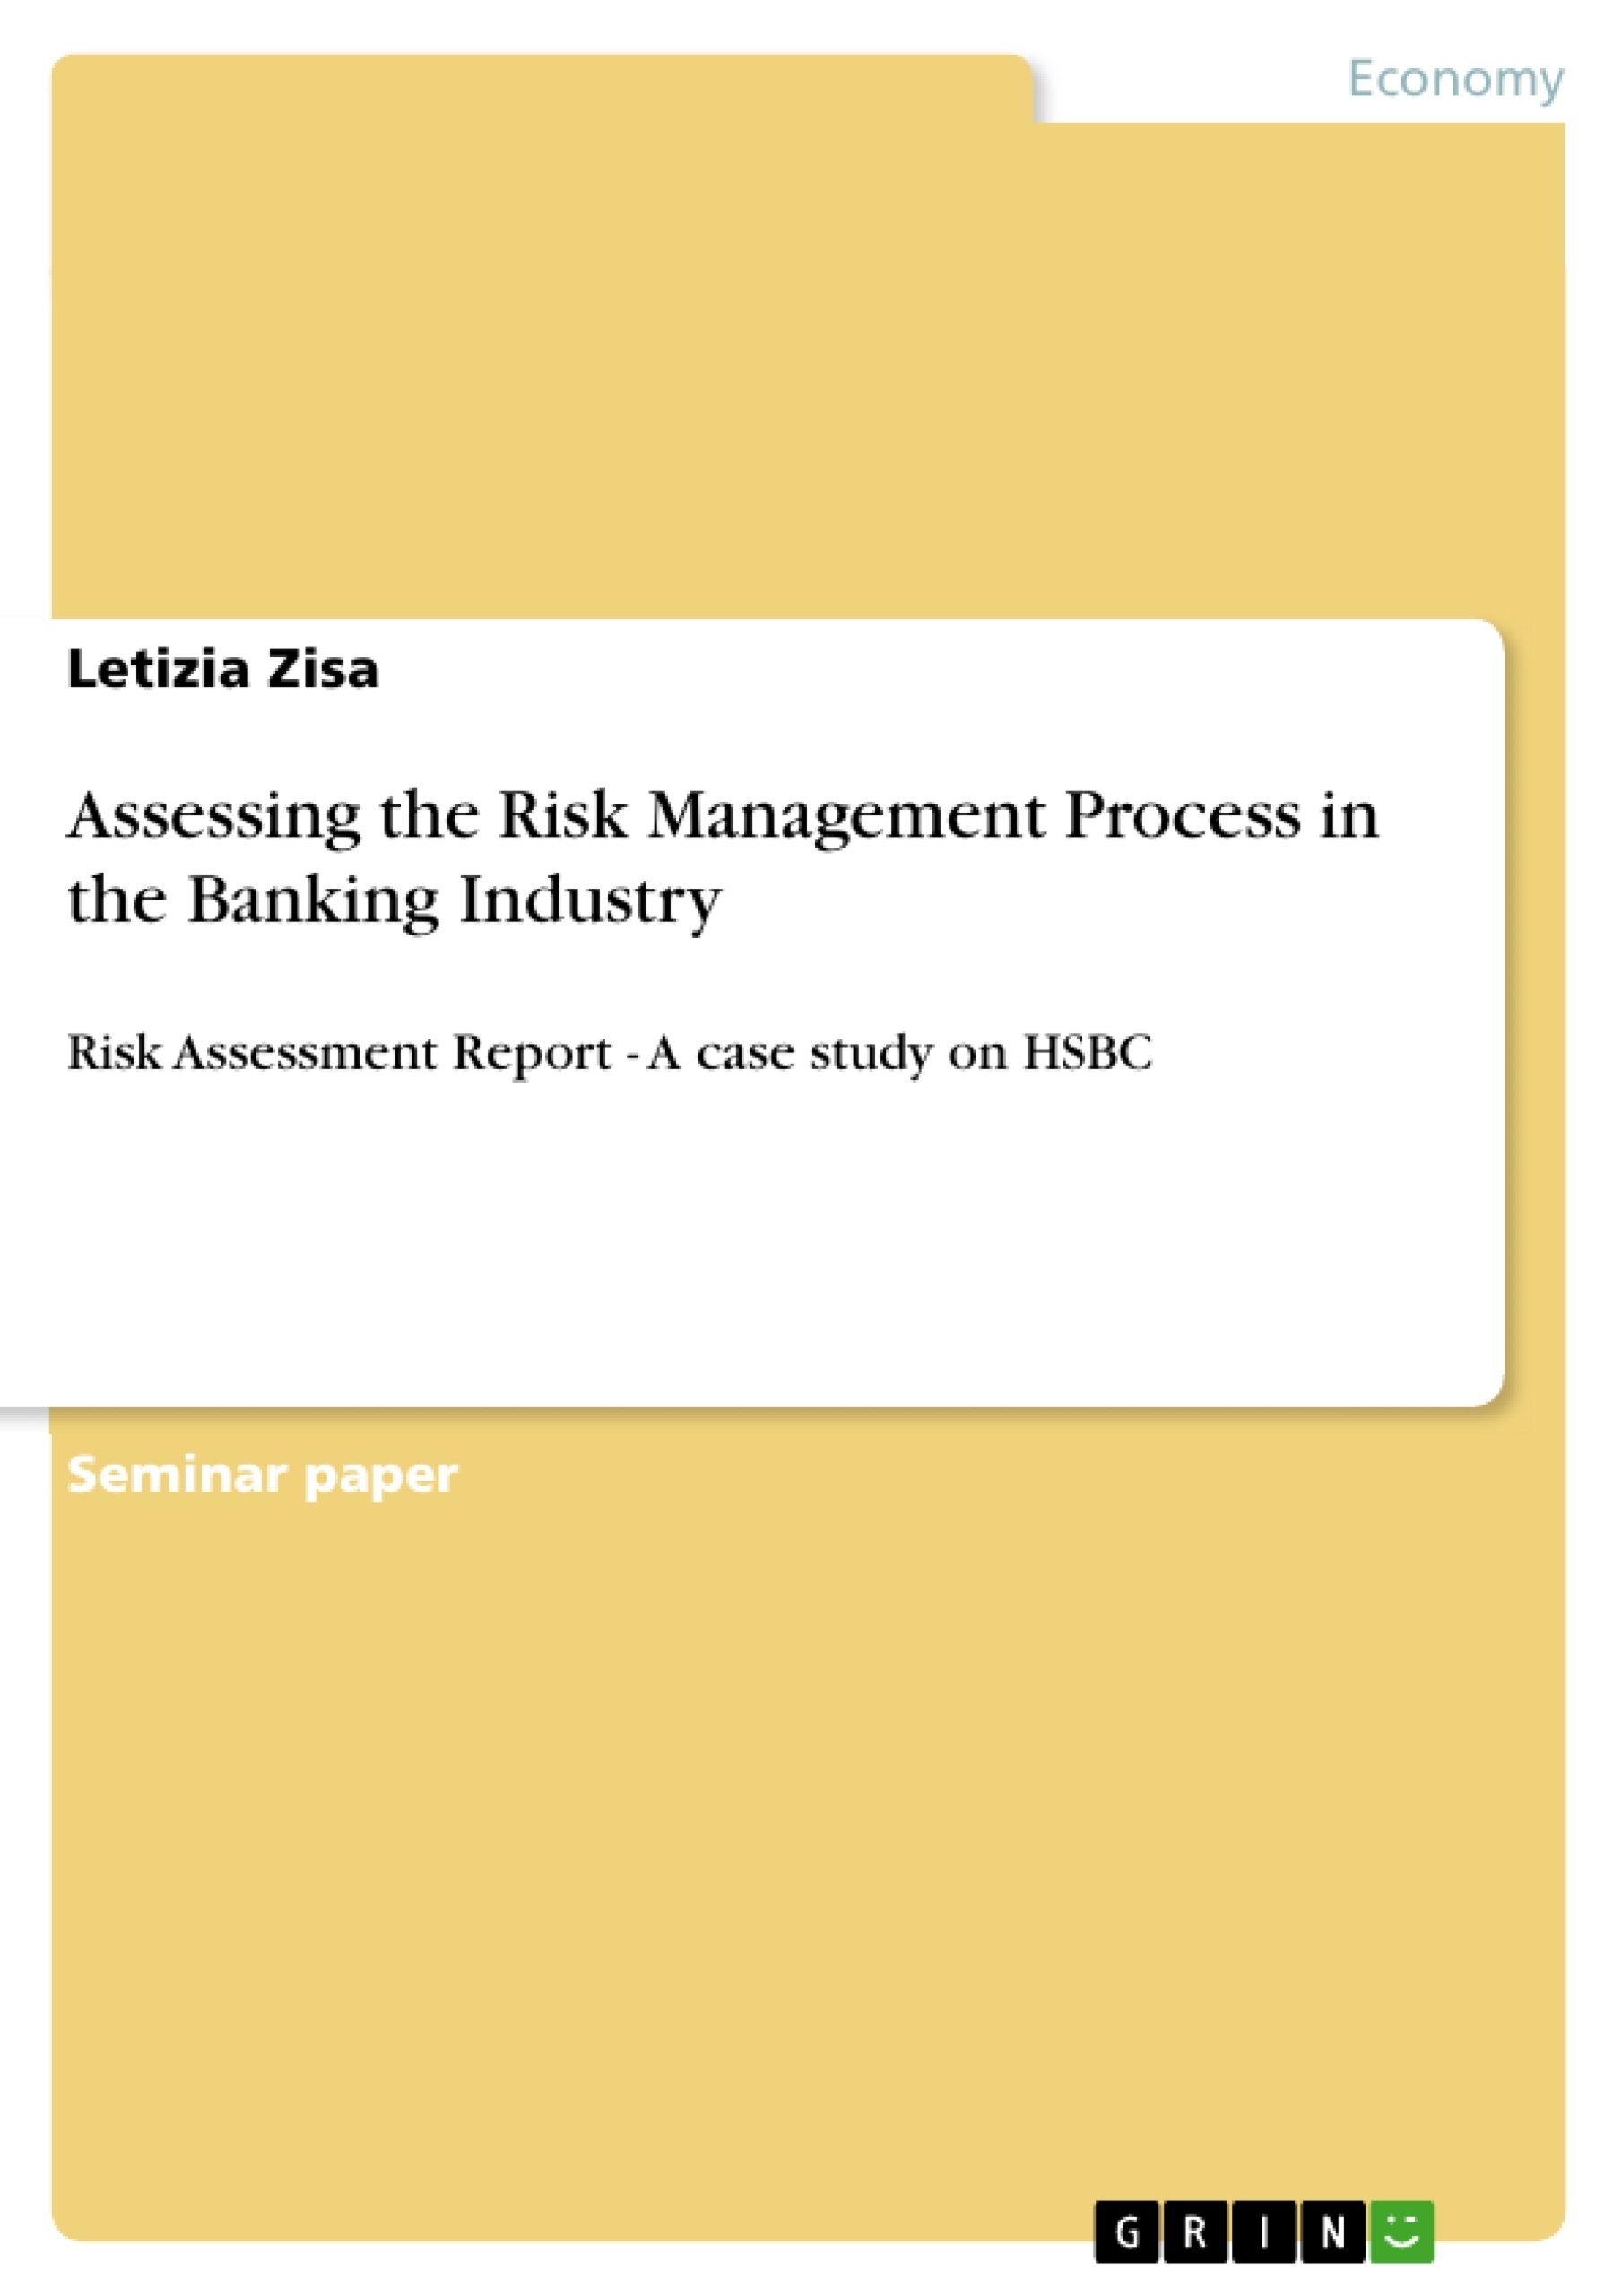 Title: Assessing the Risk Management Process in the Banking Industry